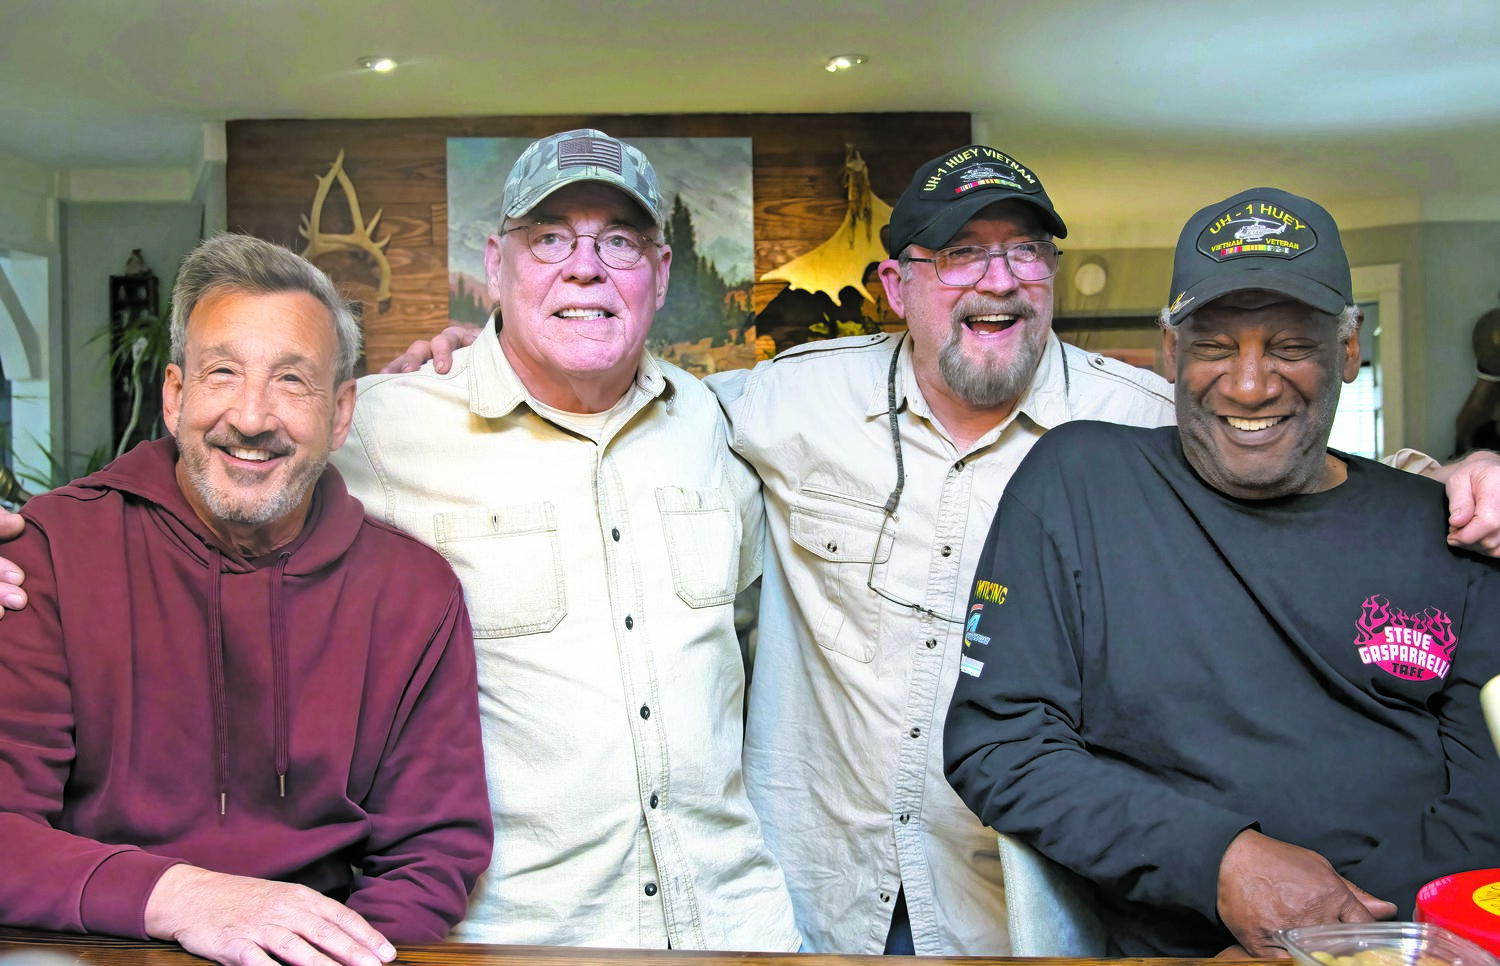 BROTHERS OF WAR: Ted Grossman, Randy Hankins, Mike and Joe Leonard met while in the military, and their camaraderie is still evident in their friendship decades later. 